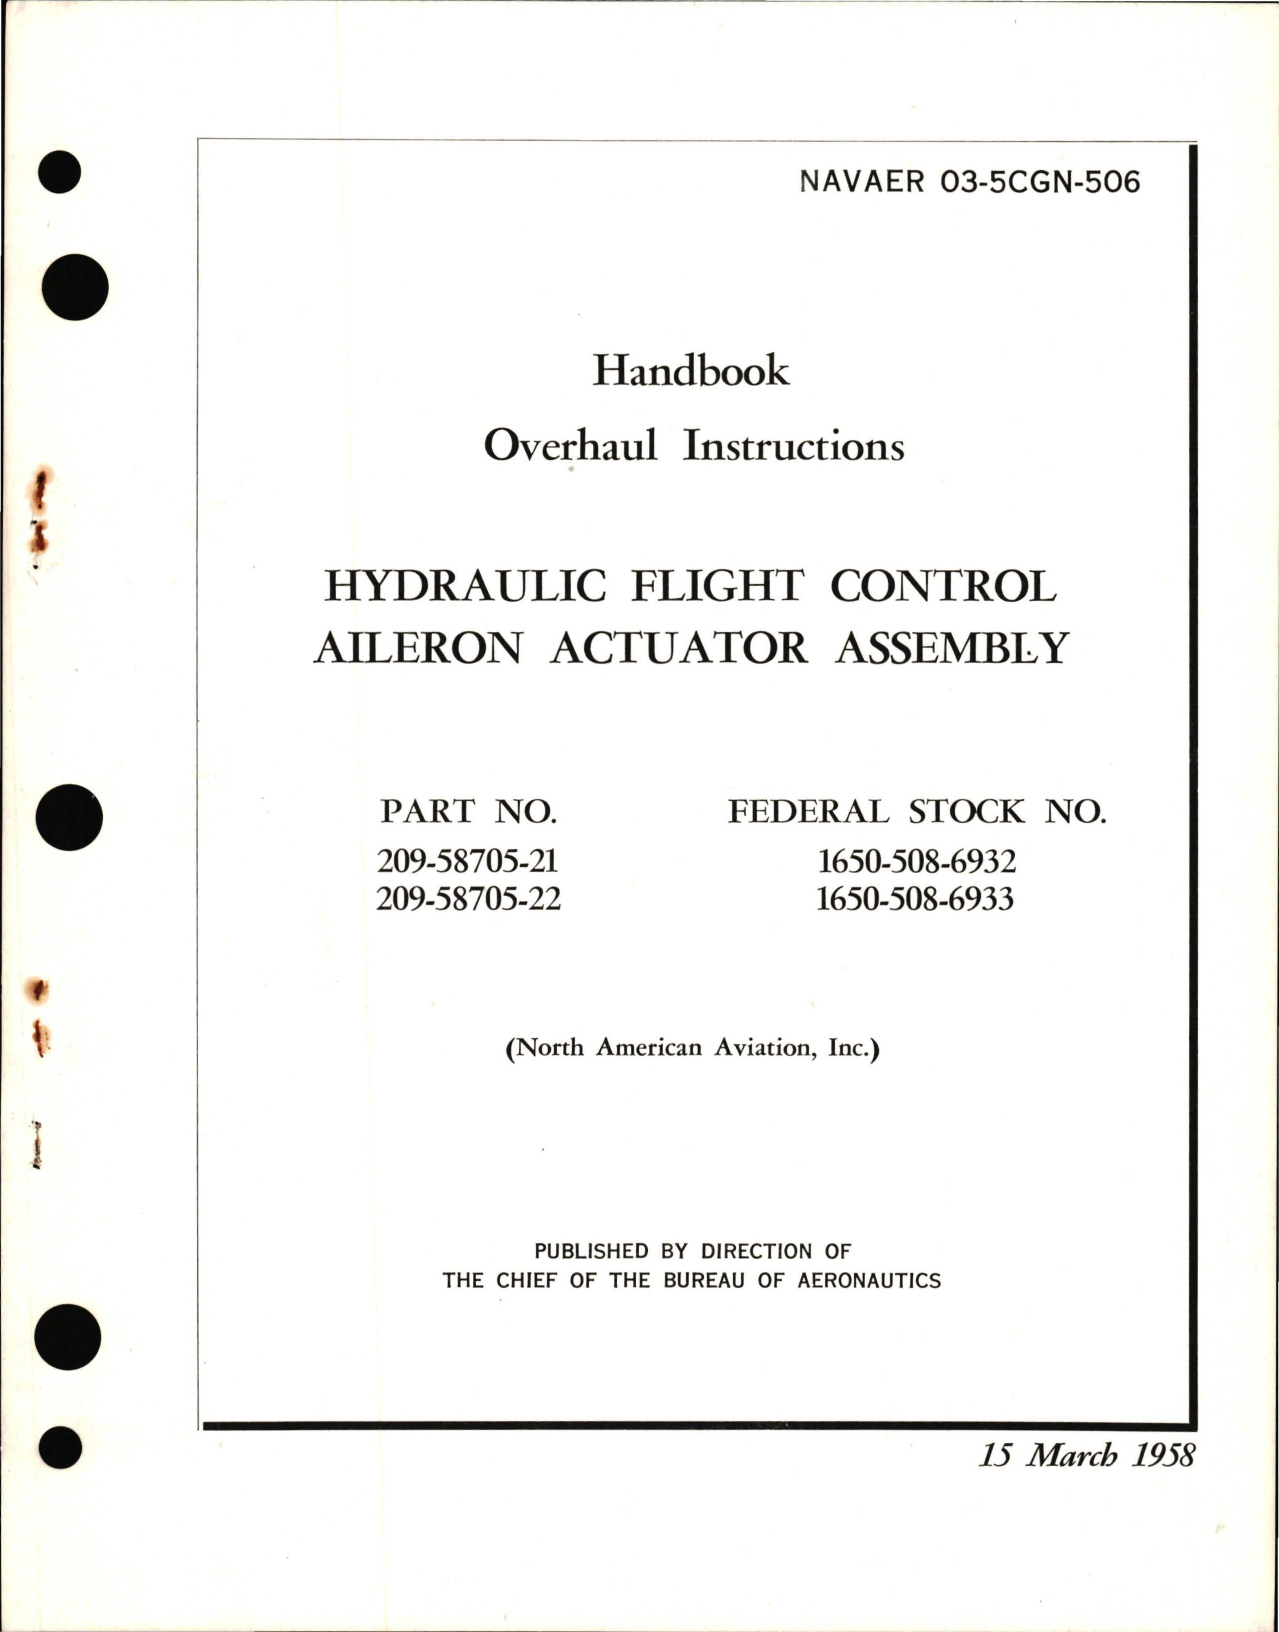 Sample page 1 from AirCorps Library document: Overhaul Instructions for Hydraulic Flight Control Aileron Actuator Assembly - Part 209-58705-21 and 209-58705-22